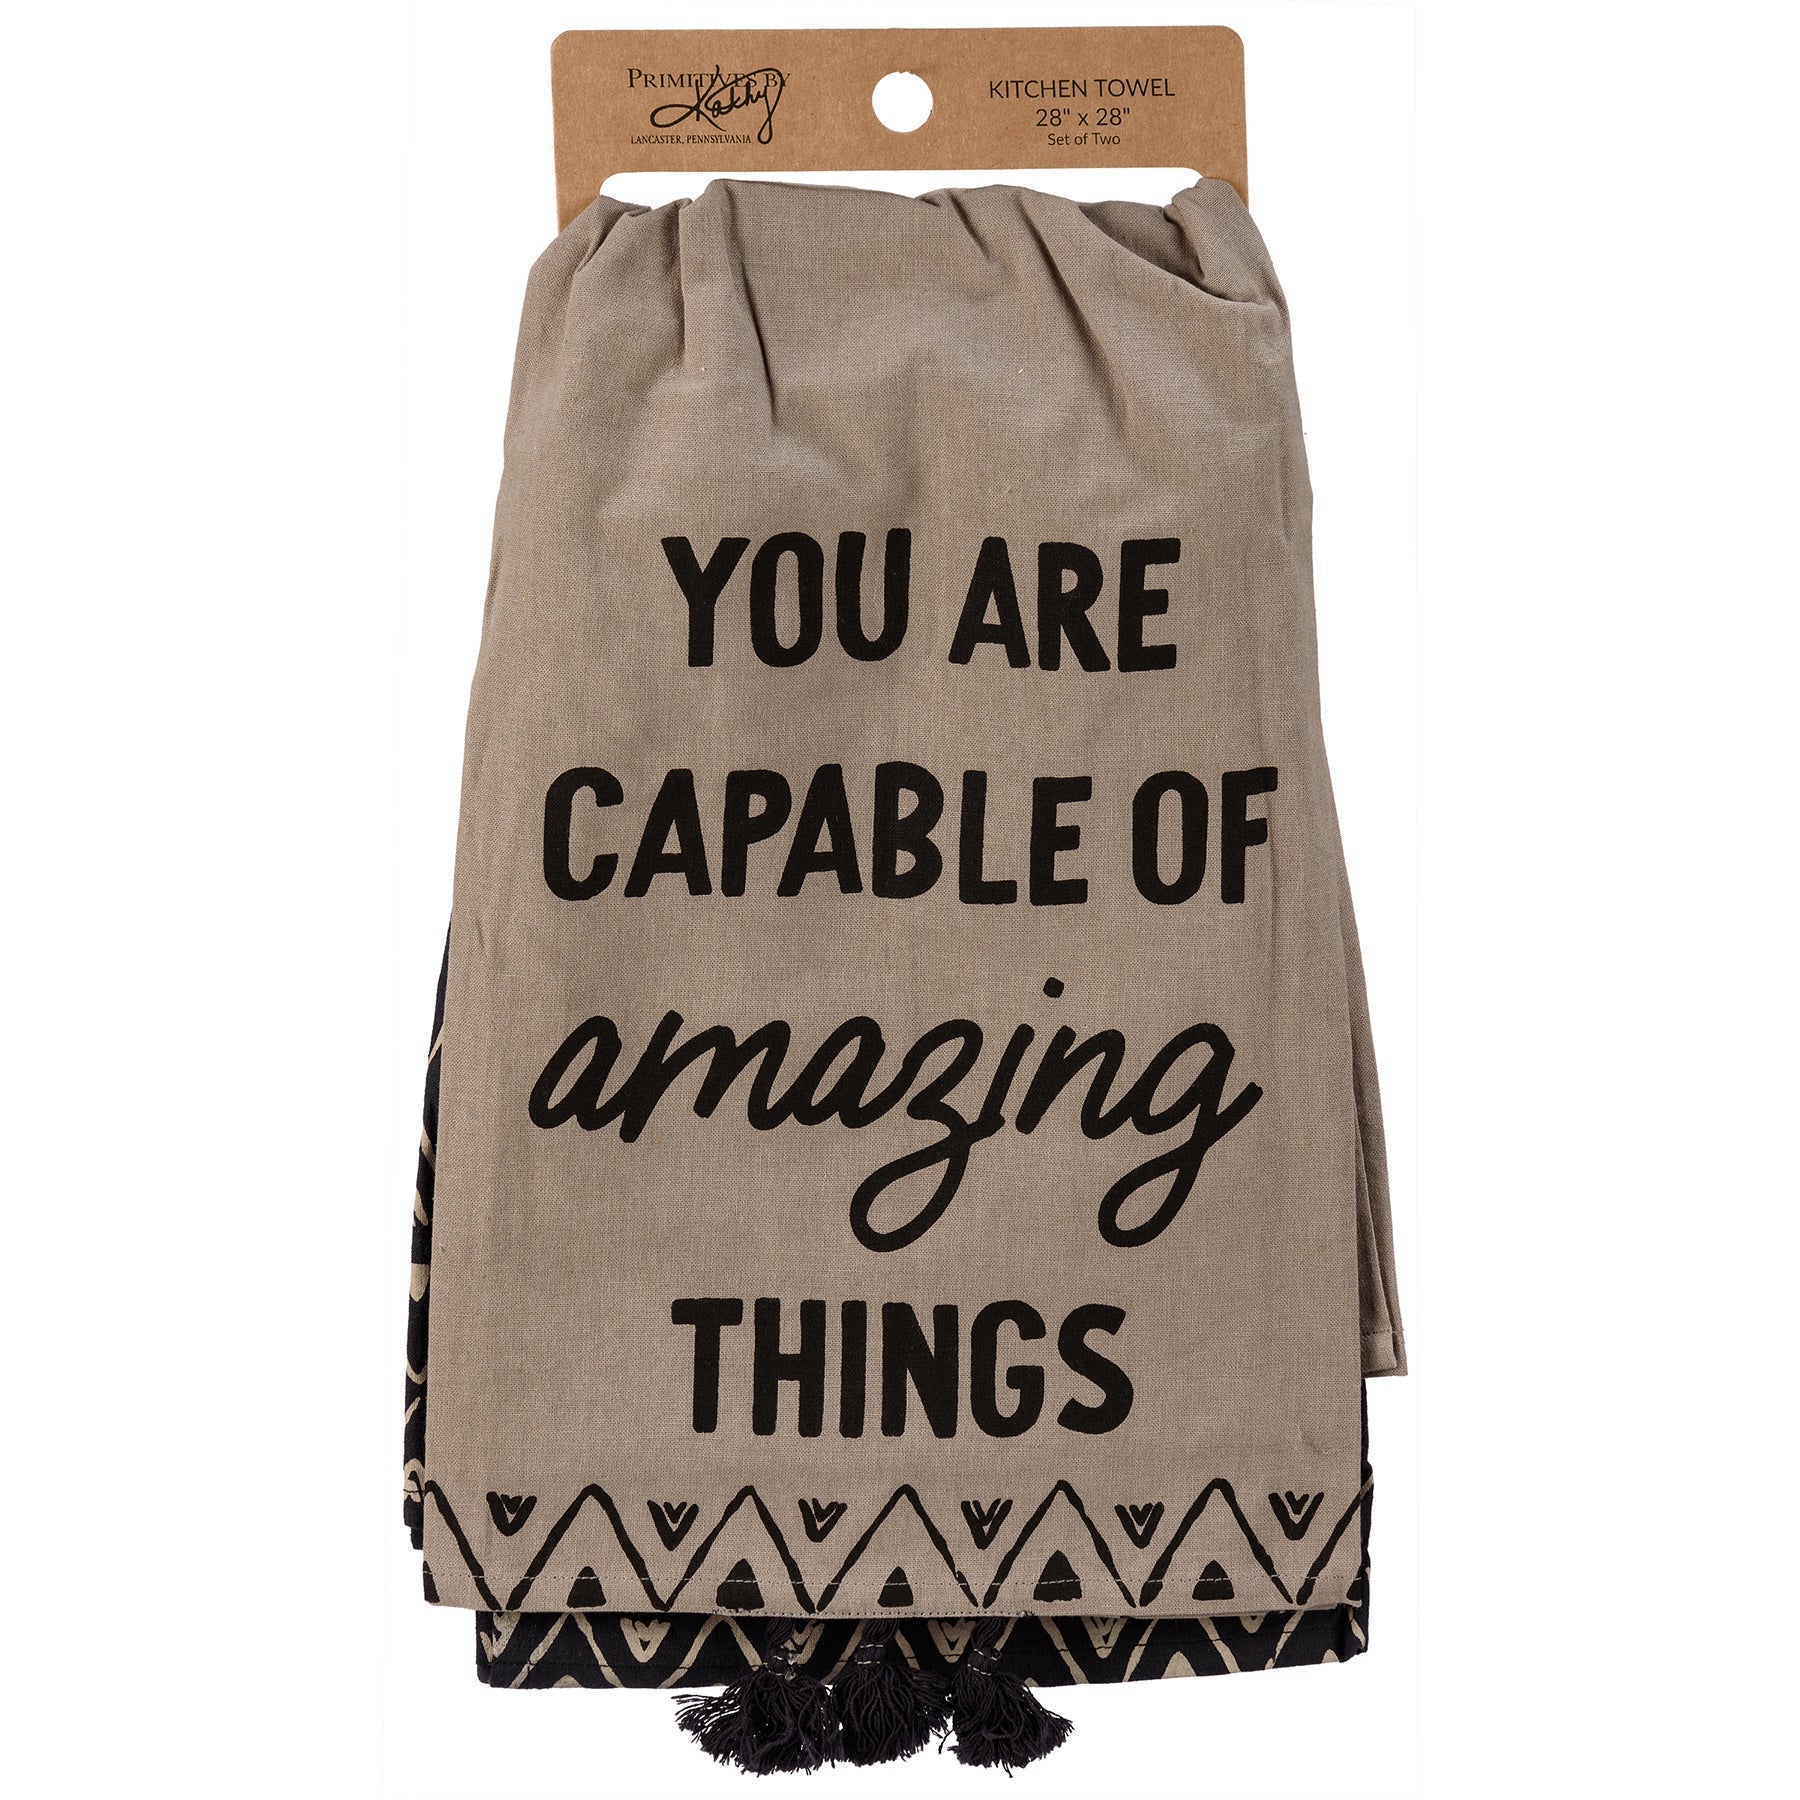 Capable Of Amazing Things Dish Cloth Towel Set | 2 Coordinating Cotton Towels